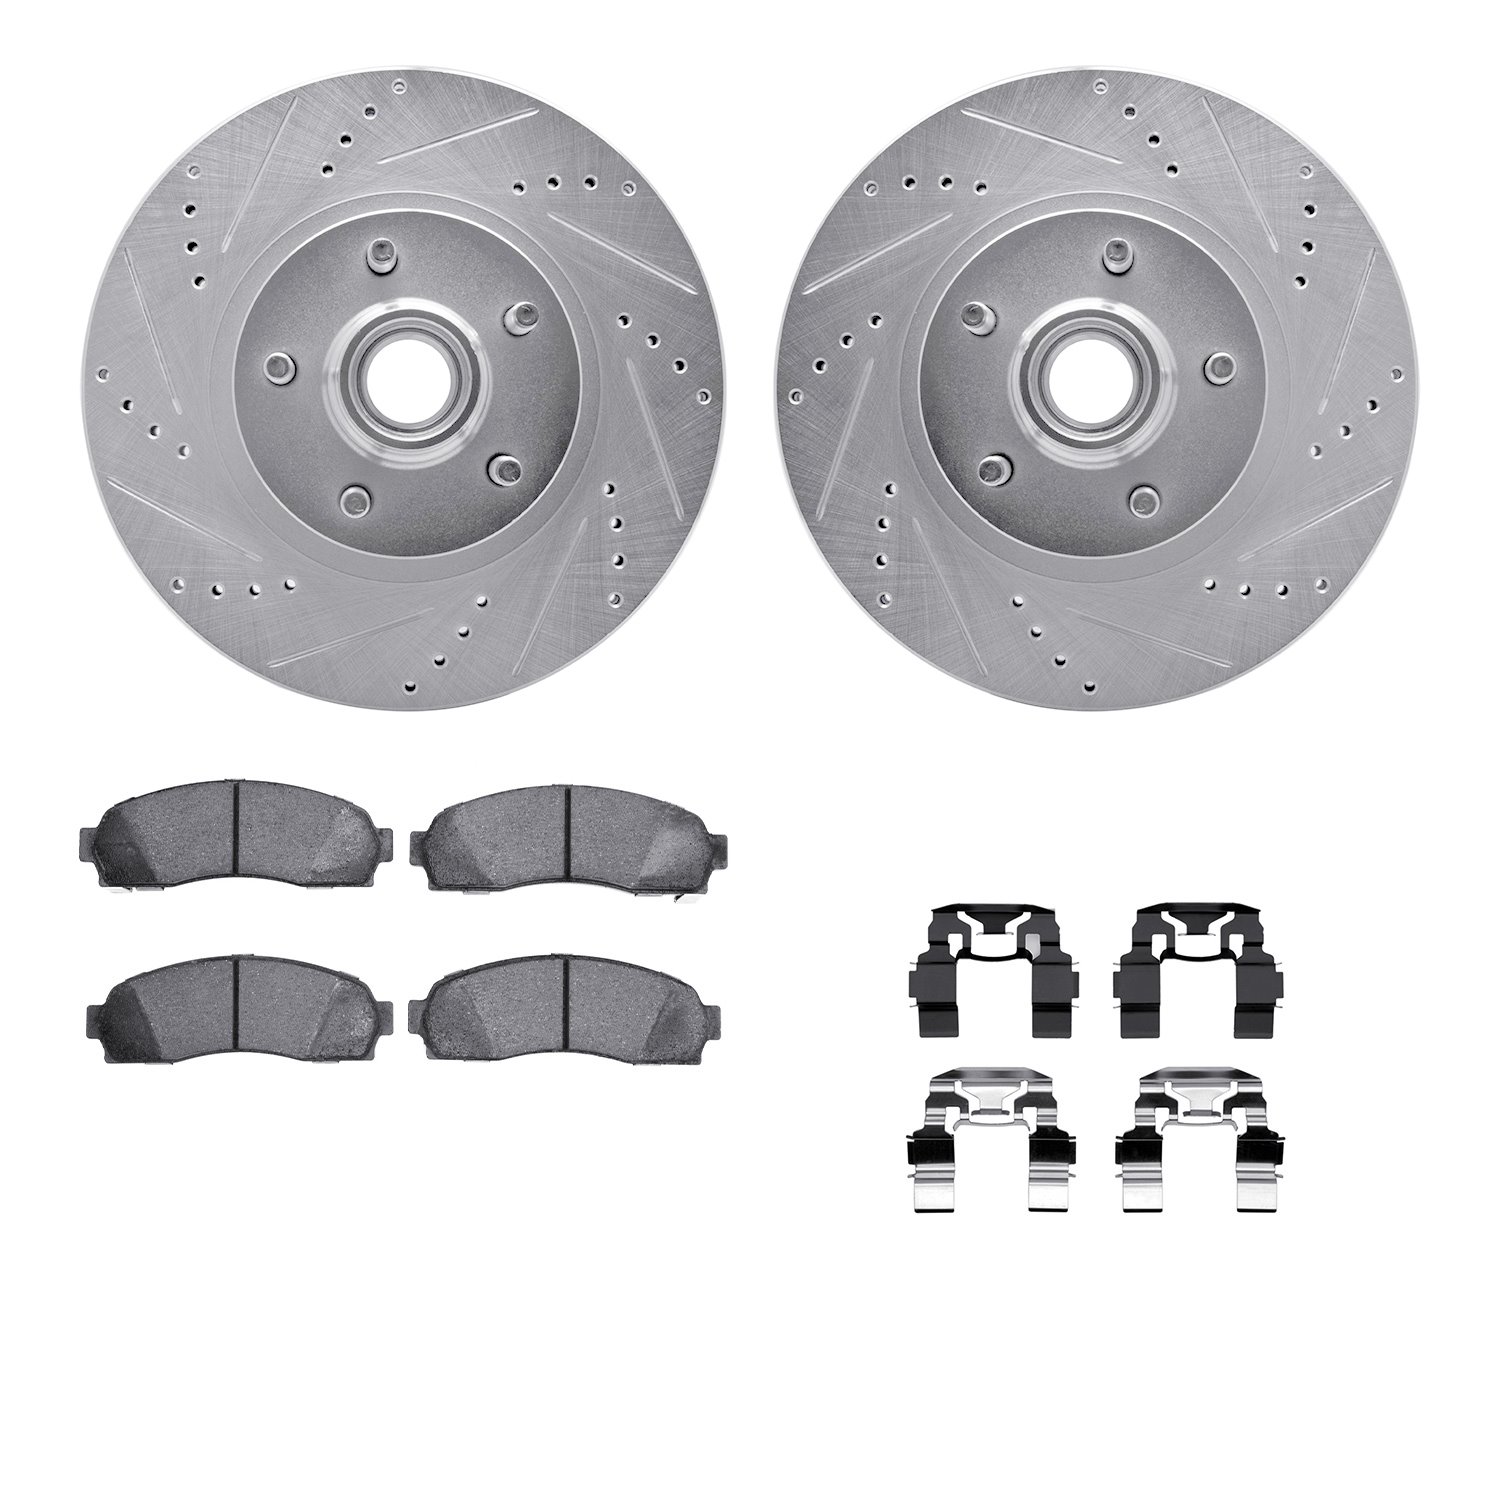 7412-54060 Drilled/Slotted Brake Rotors with Ultimate-Duty Brake Pads Kit & Hardware [Silver], 2001-2005 Ford/Lincoln/Mercury/Ma